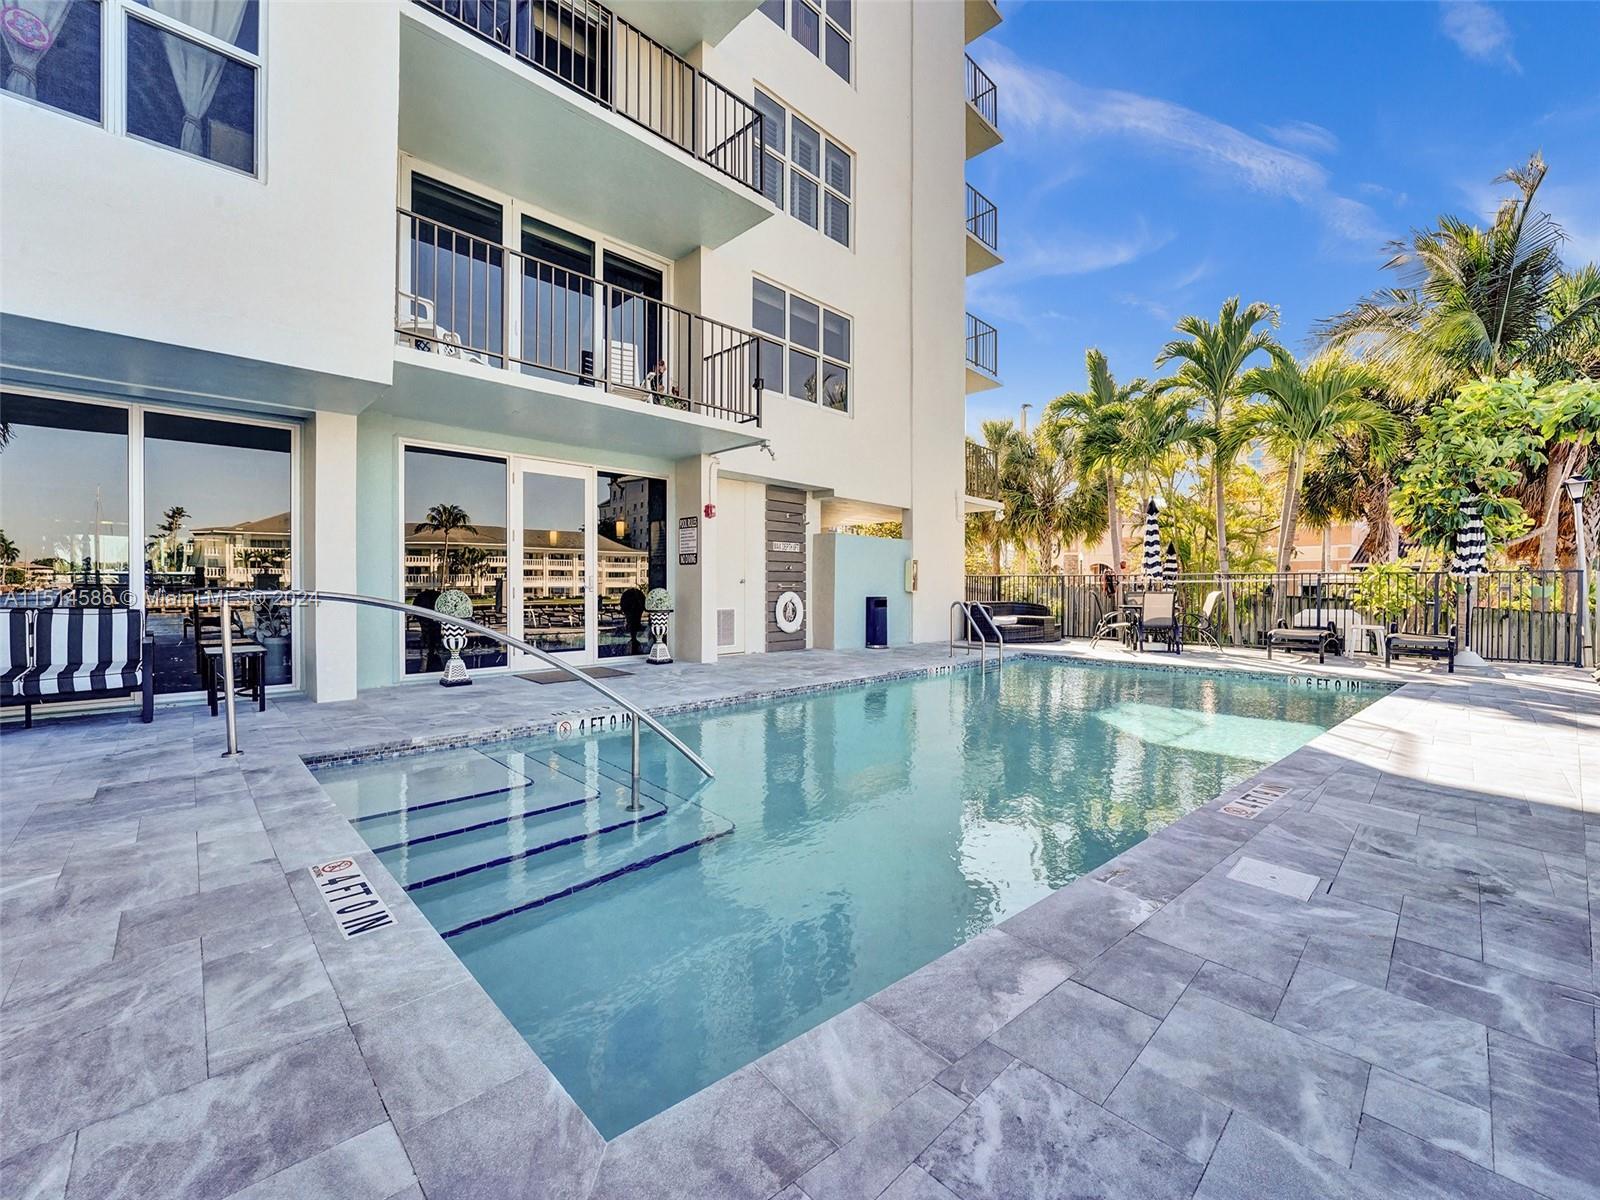 Photo of 3233 NE 32nd Ave #201 in Fort Lauderdale, FL